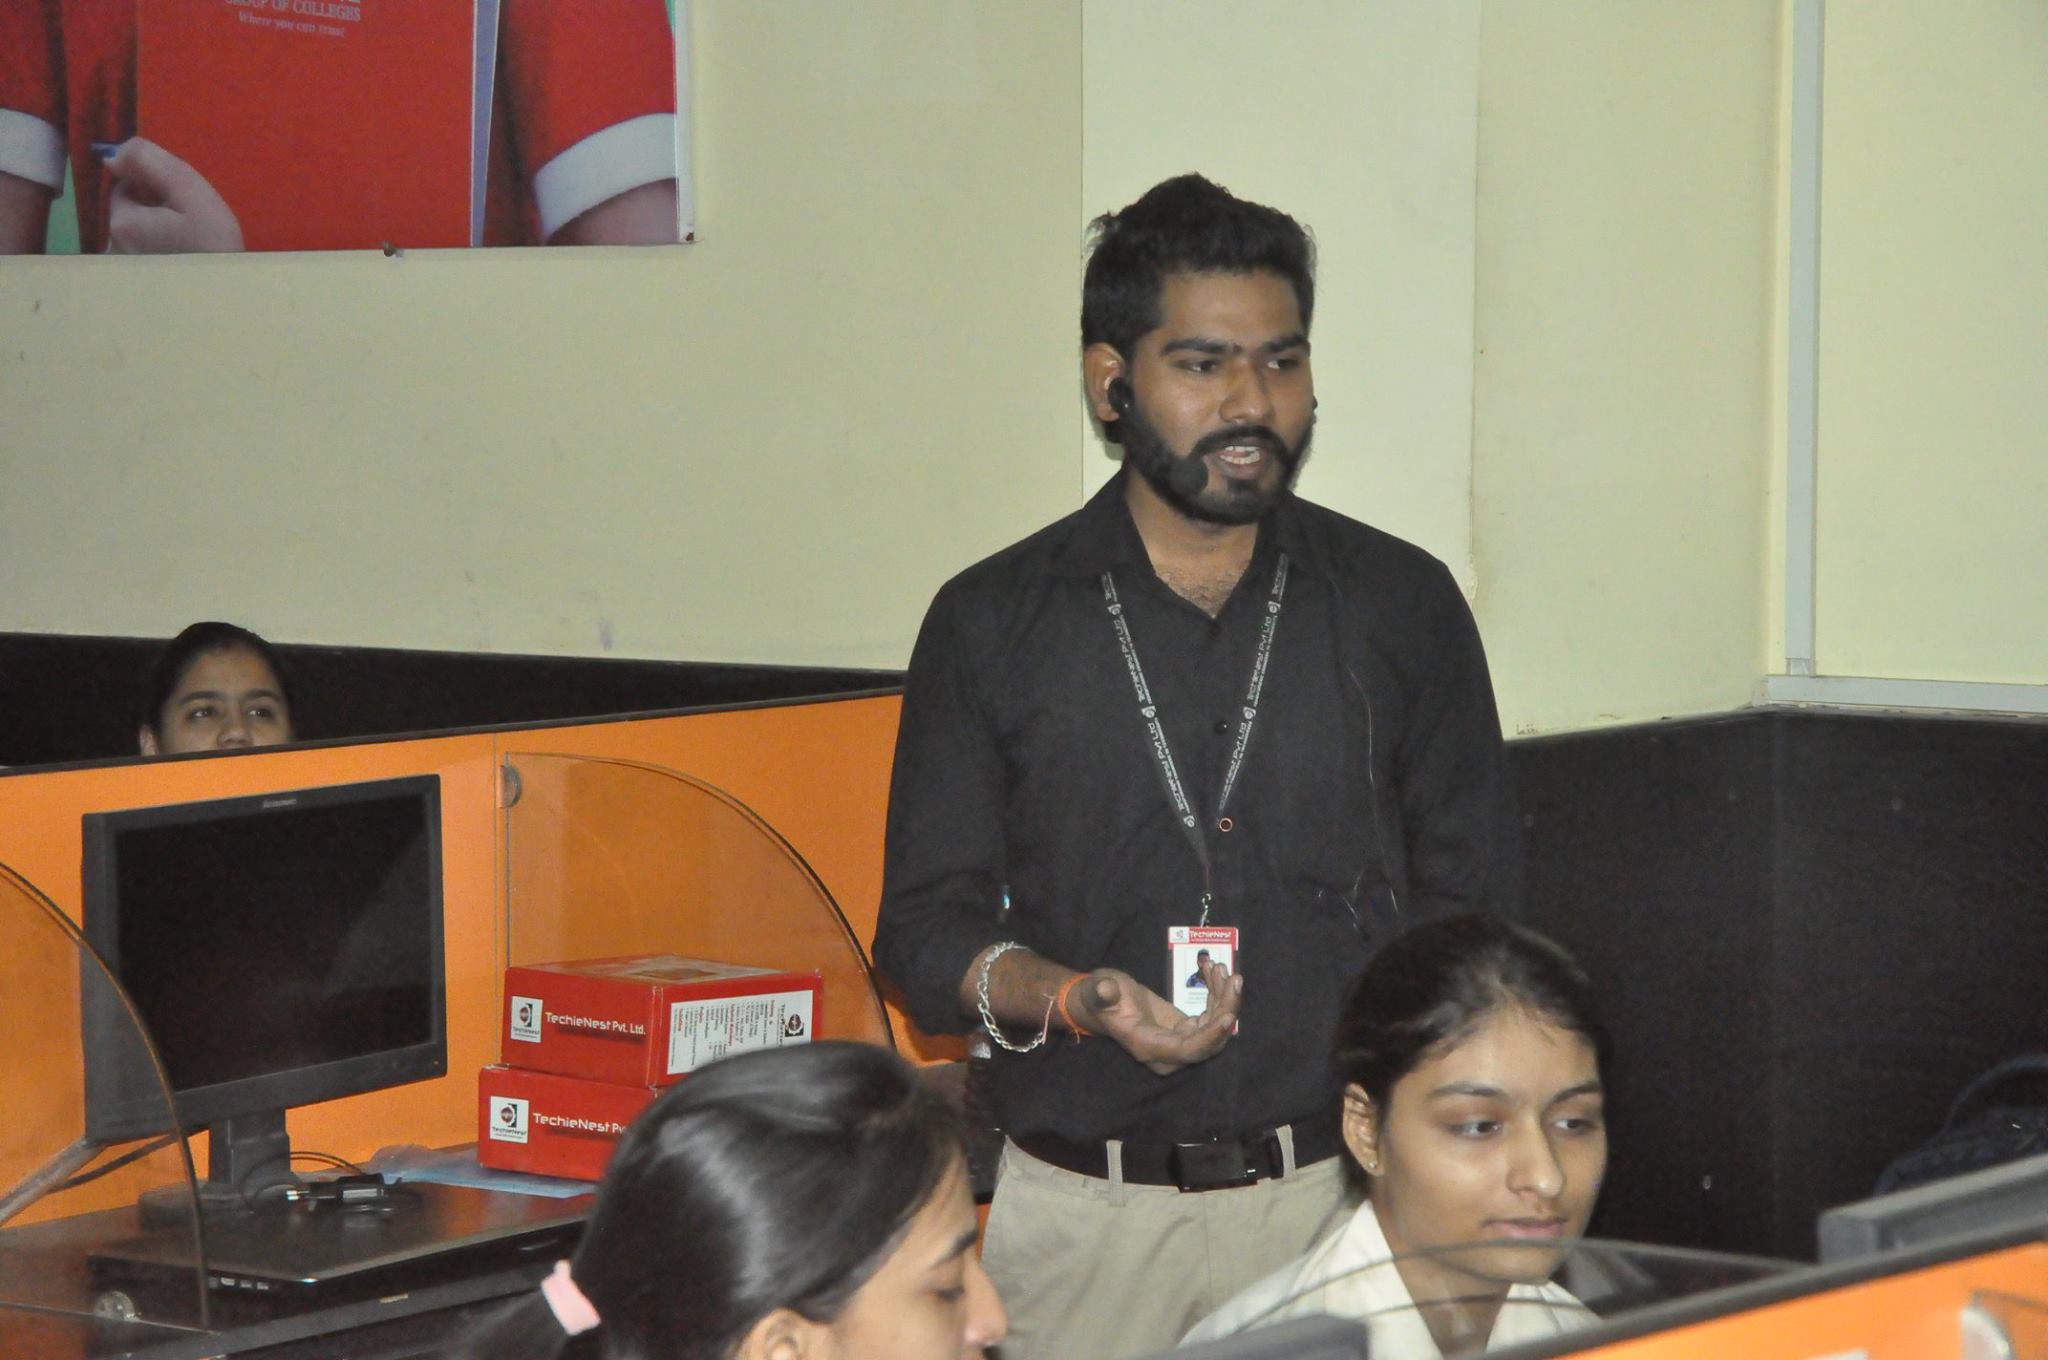 Workshop on Internet of Things (IOT)- Arduino, Raspberry PI, Hacking, Networking & Micro controller